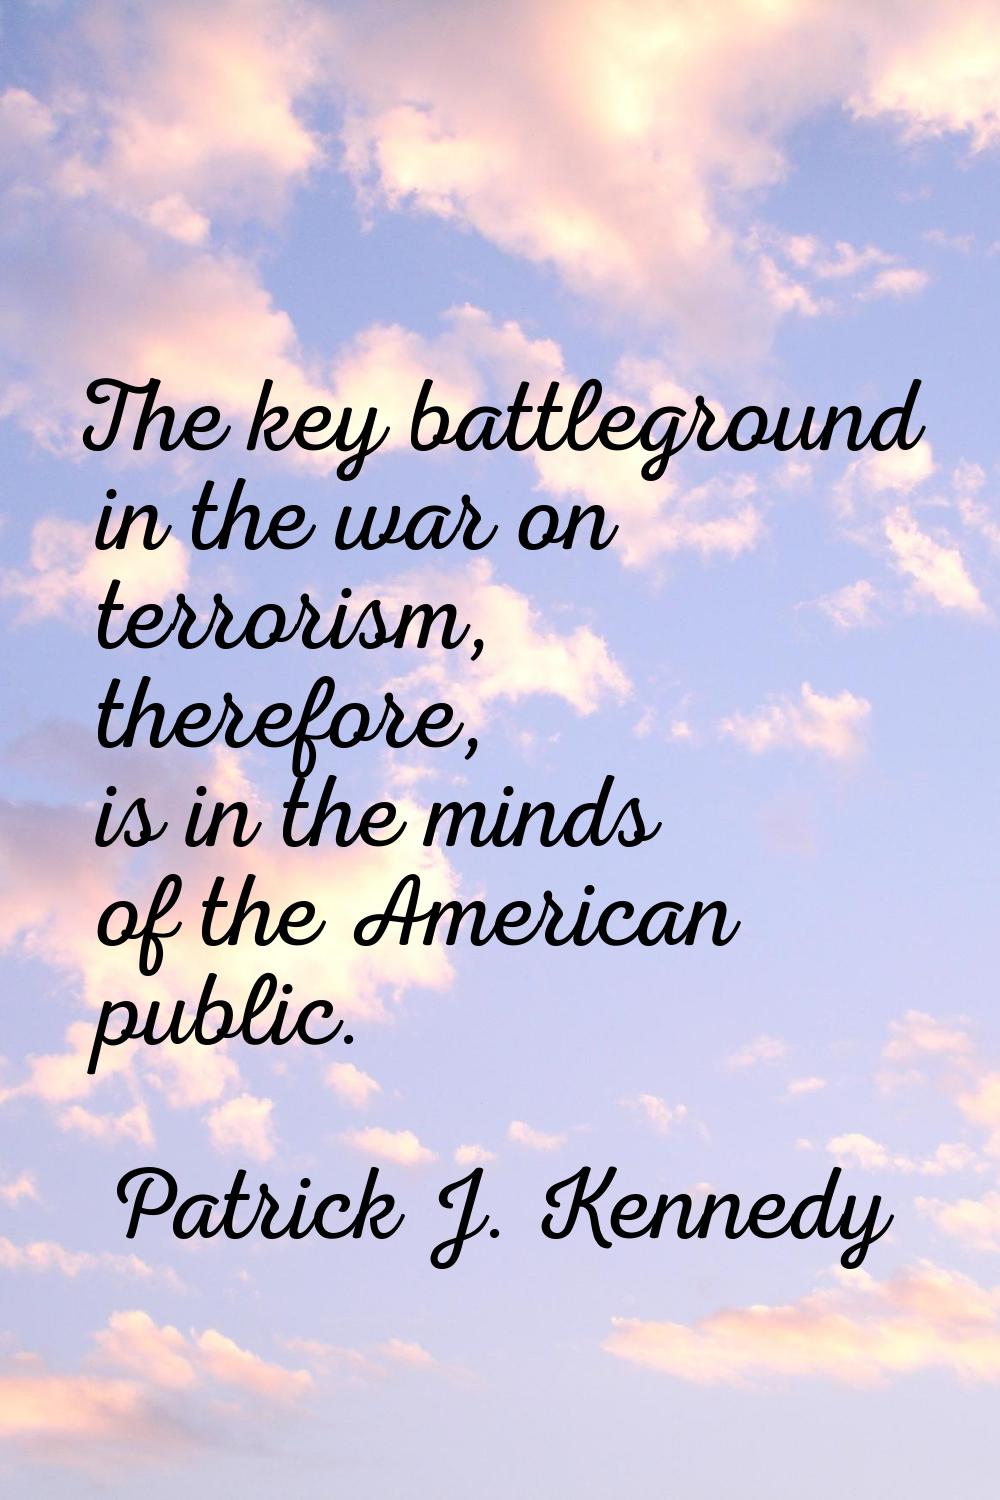 The key battleground in the war on terrorism, therefore, is in the minds of the American public.